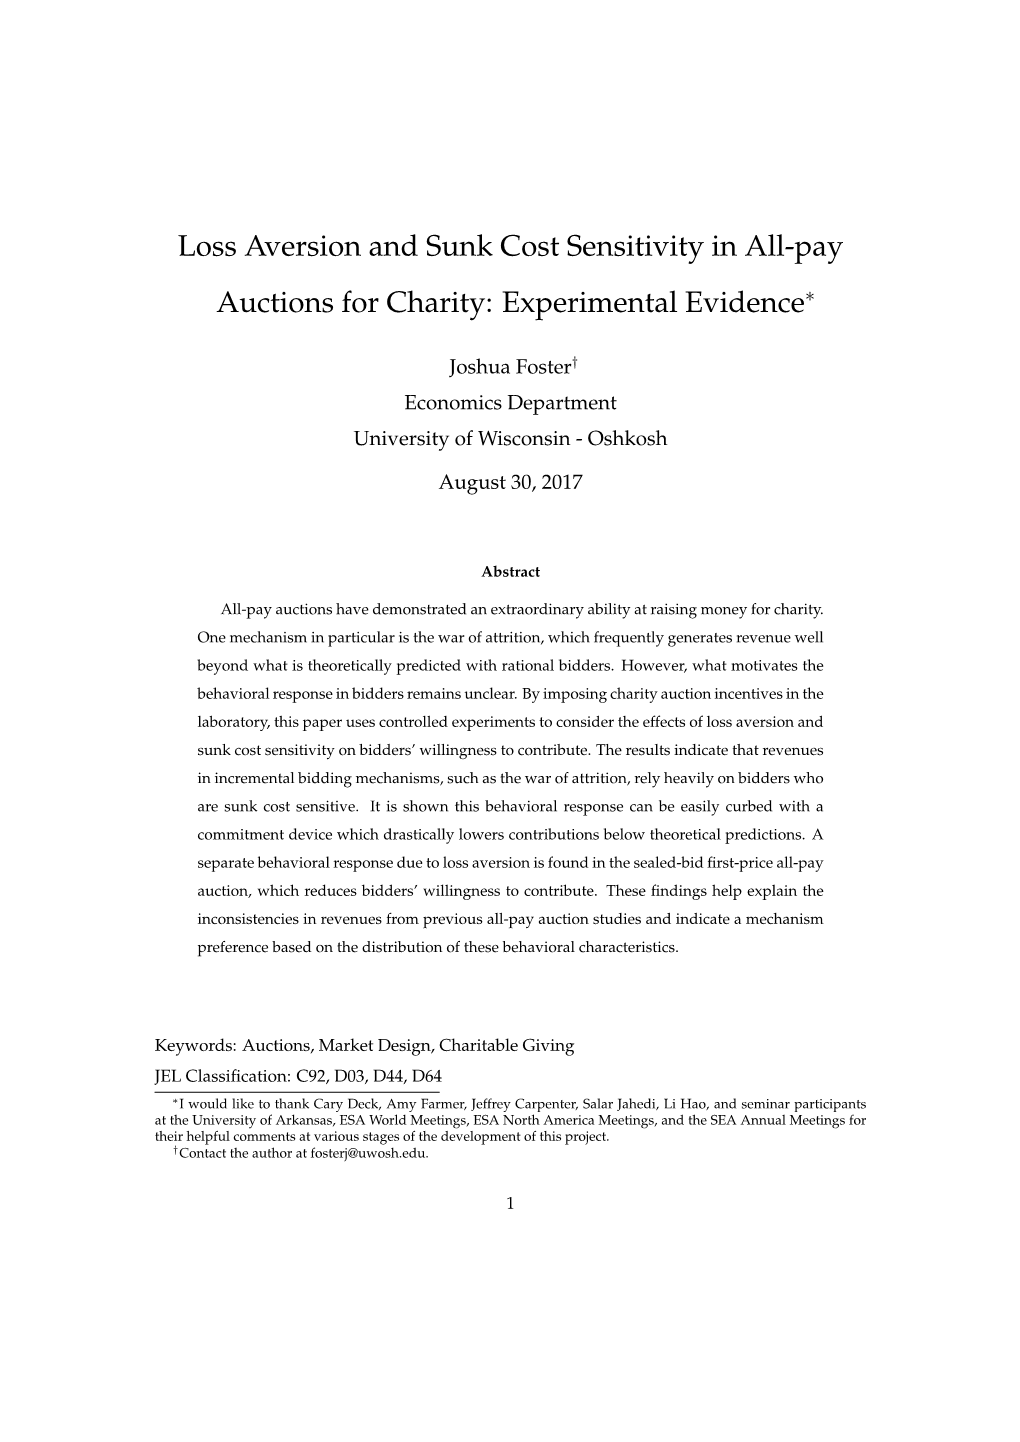 Loss Aversion and Sunk Cost Sensitivity in All-Pay Auctions for Charity: Experimental Evidence∗